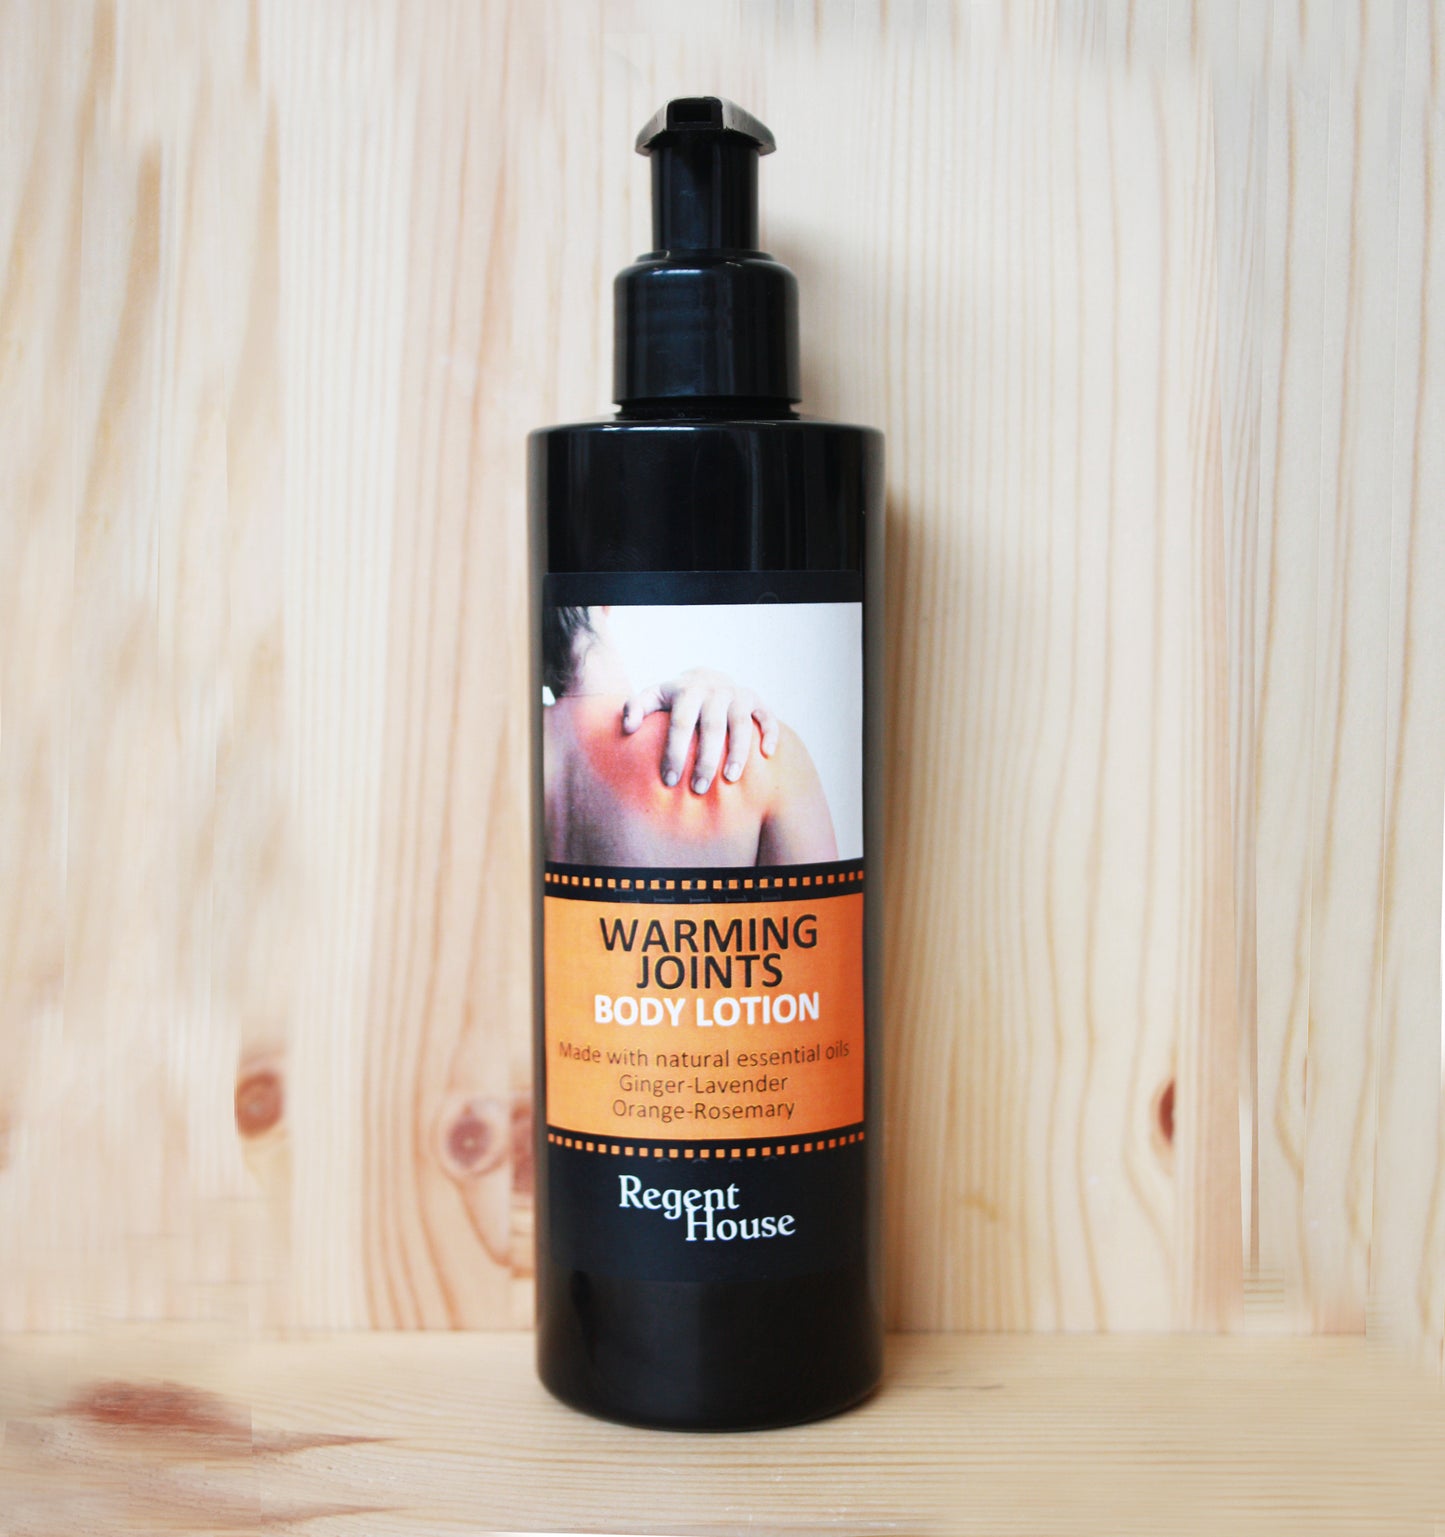 Warming Joints Body Lotion